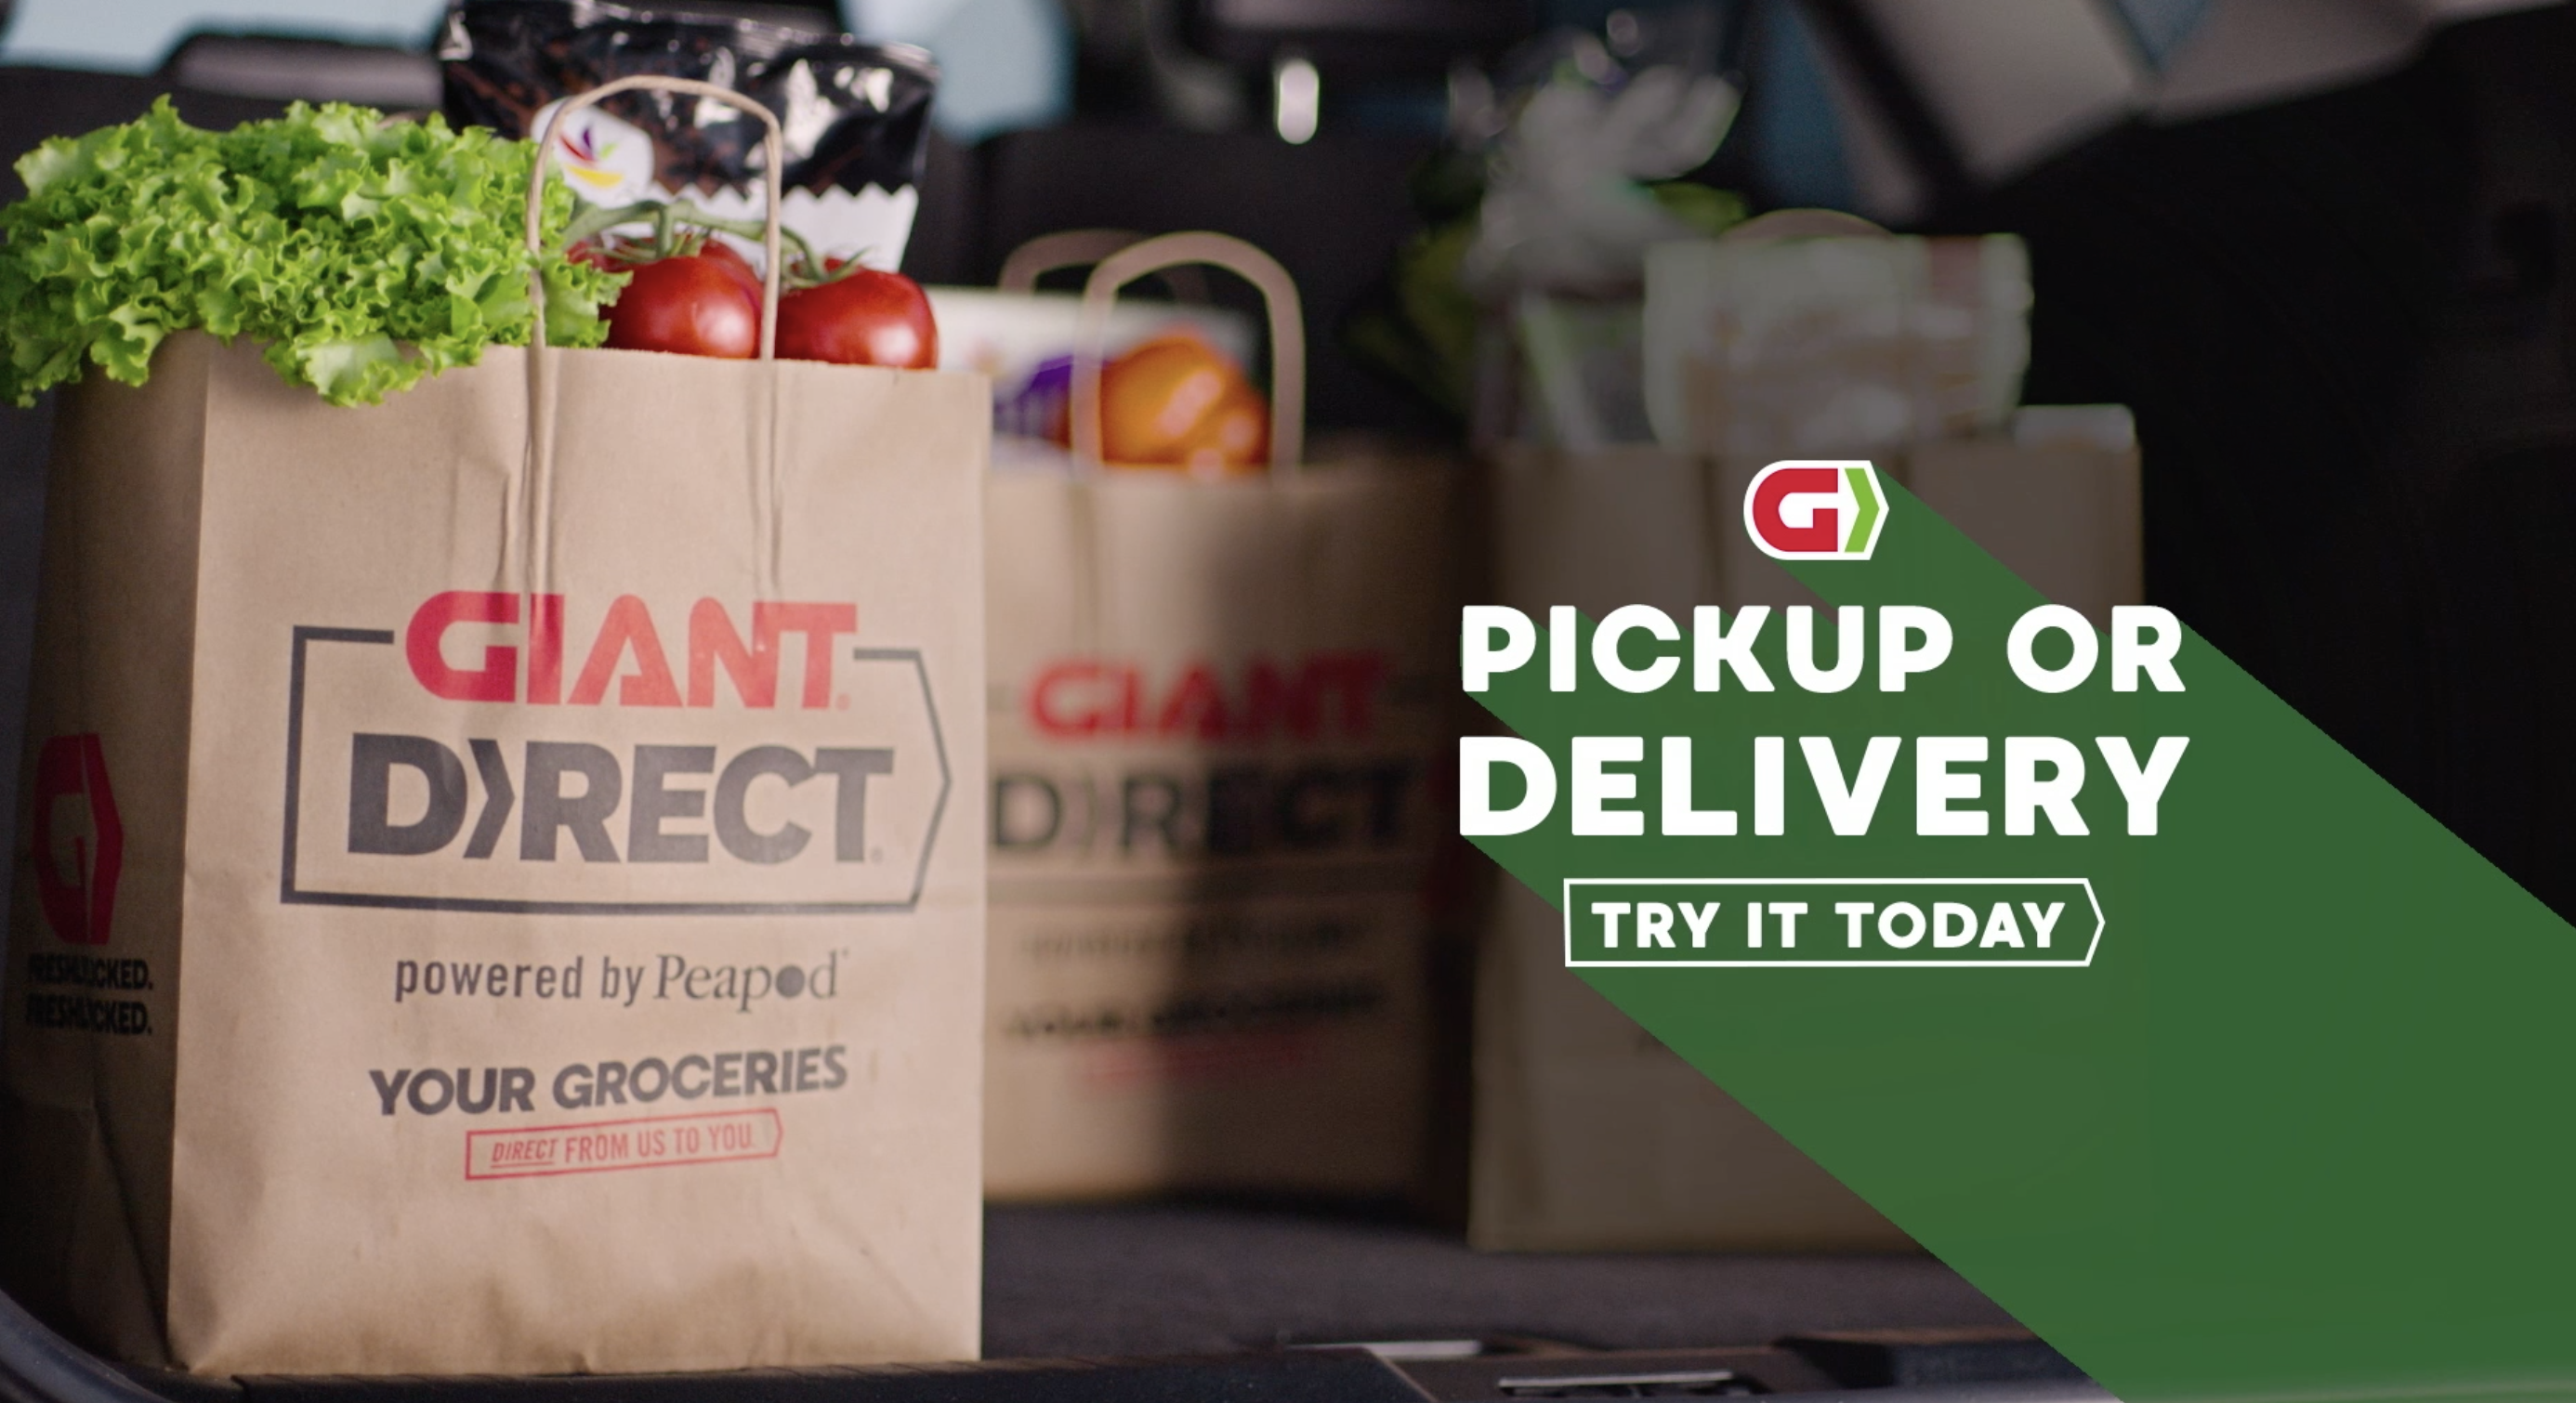 Giant Food launches ad campaign focused on grocery pickup Supermarket